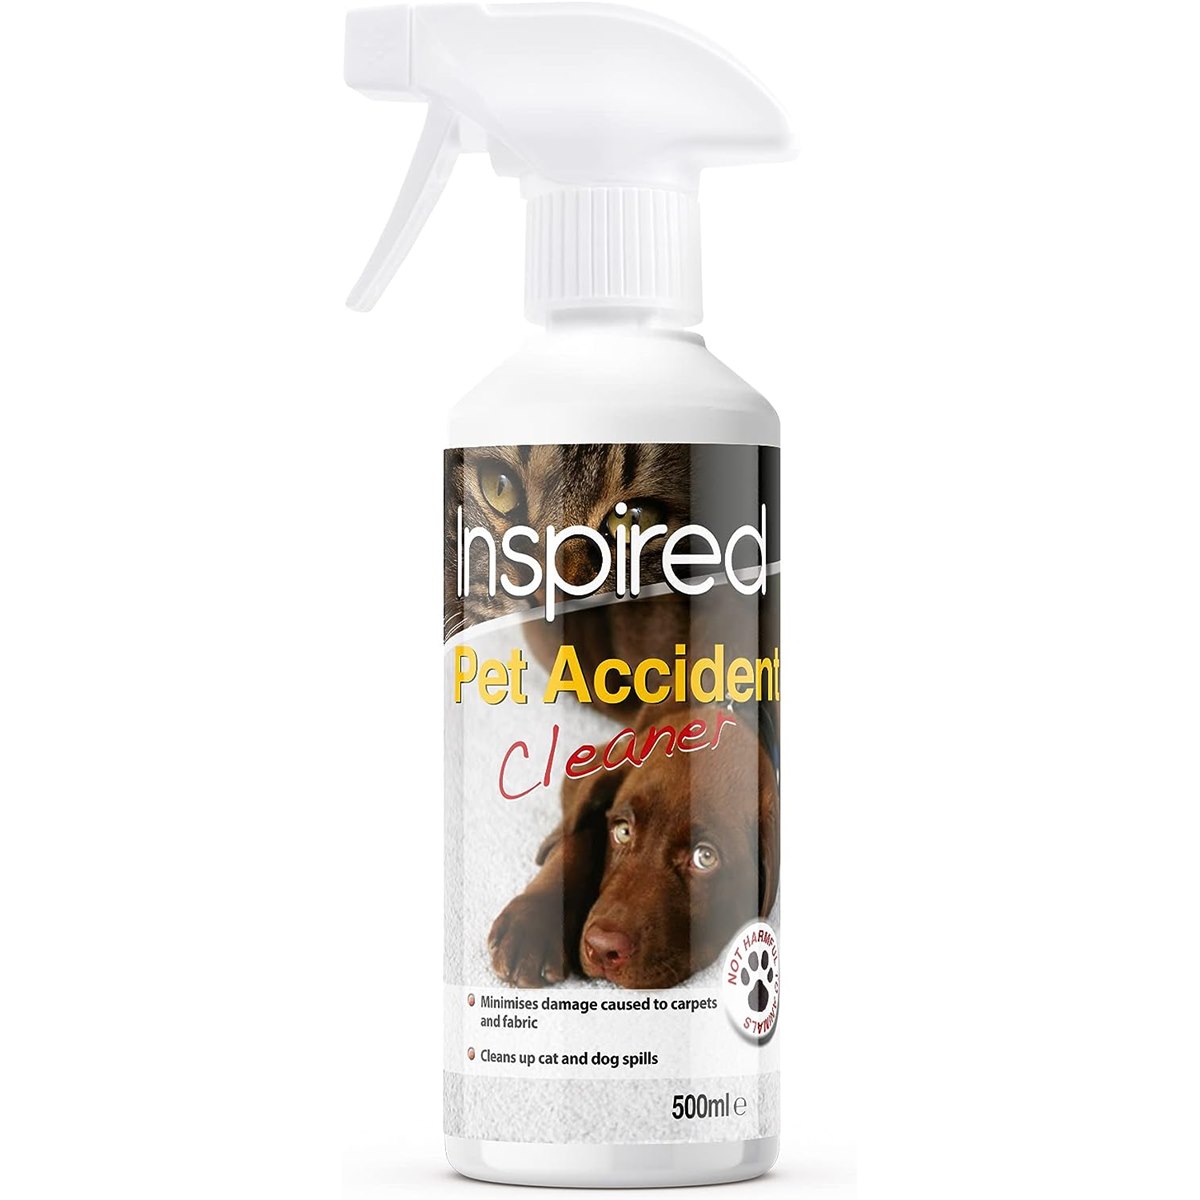 Inspired Pet Accident Cleaner Spray 500ml